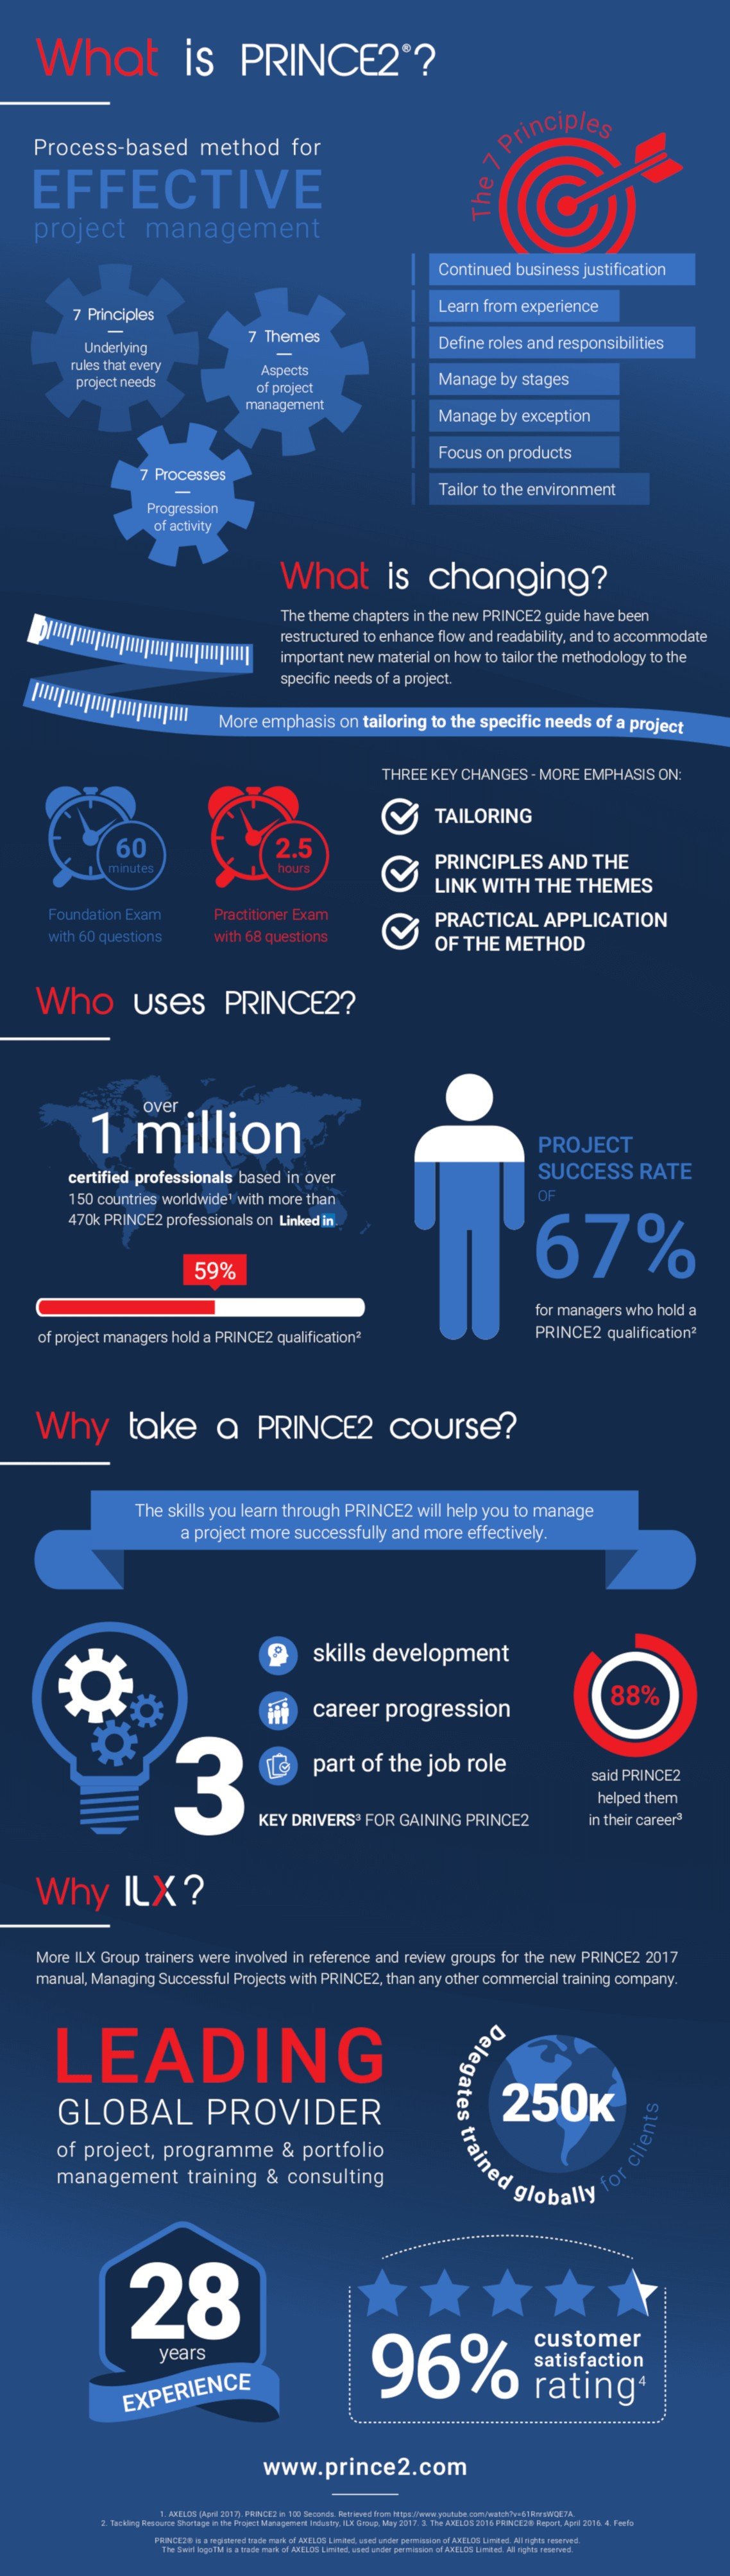 What is Prince2?